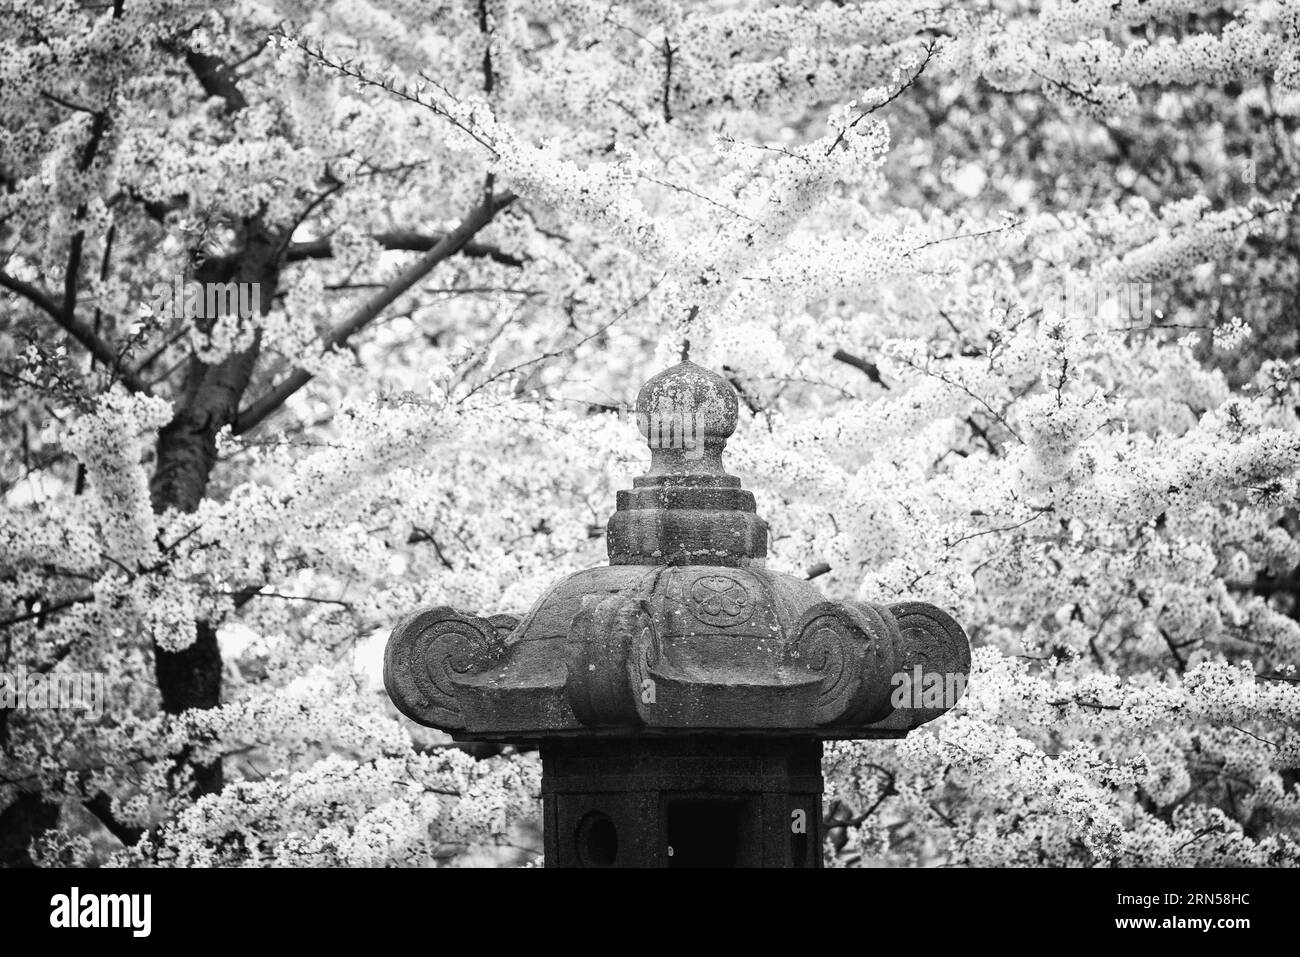 WASHINGTON DC, United States — A black and white photograph of Washington DC's famous cherry blossoms. Each spring, cherry blossoms in full bloom envelope the Tidal Basin, marking the onset of spring in the nation's capital. This annual event draws thousands, symbolizing the enduring friendship between the U.S. and Japan, a gift from Tokyo in 1912. Stock Photo